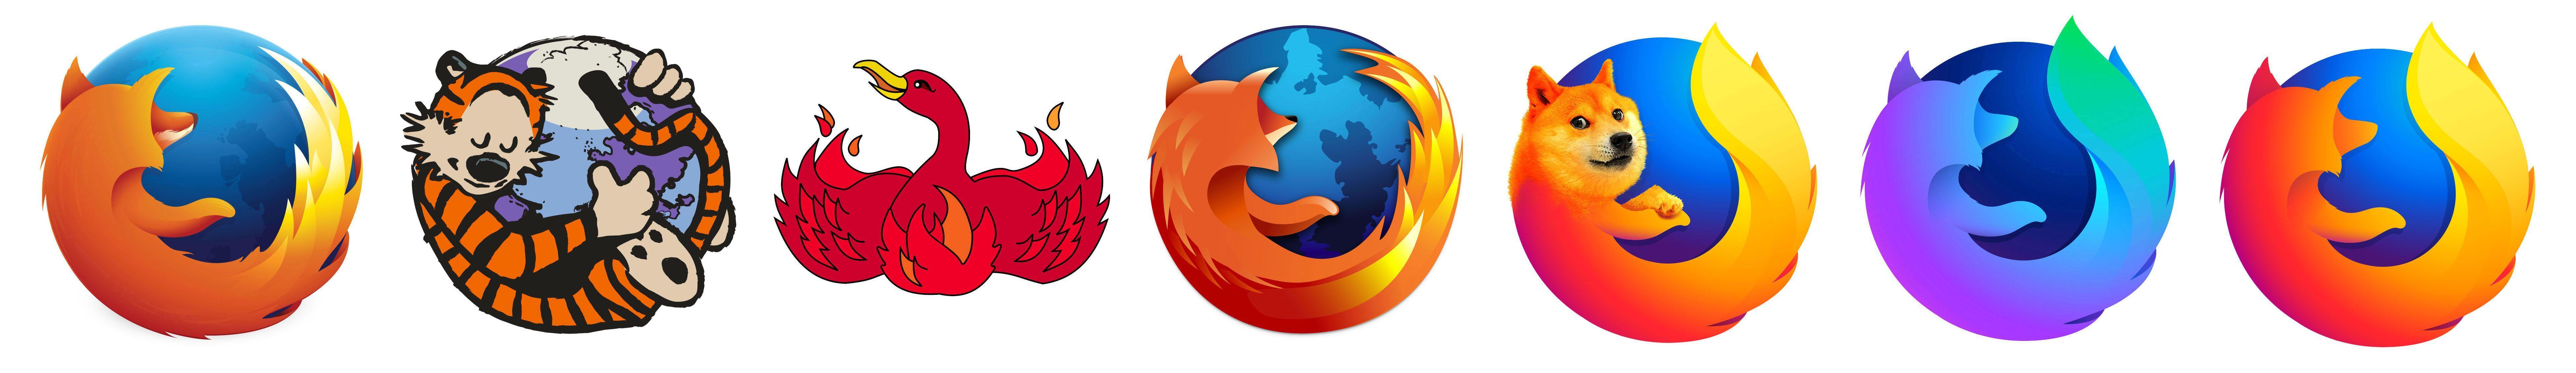 mozilla firefox old version download